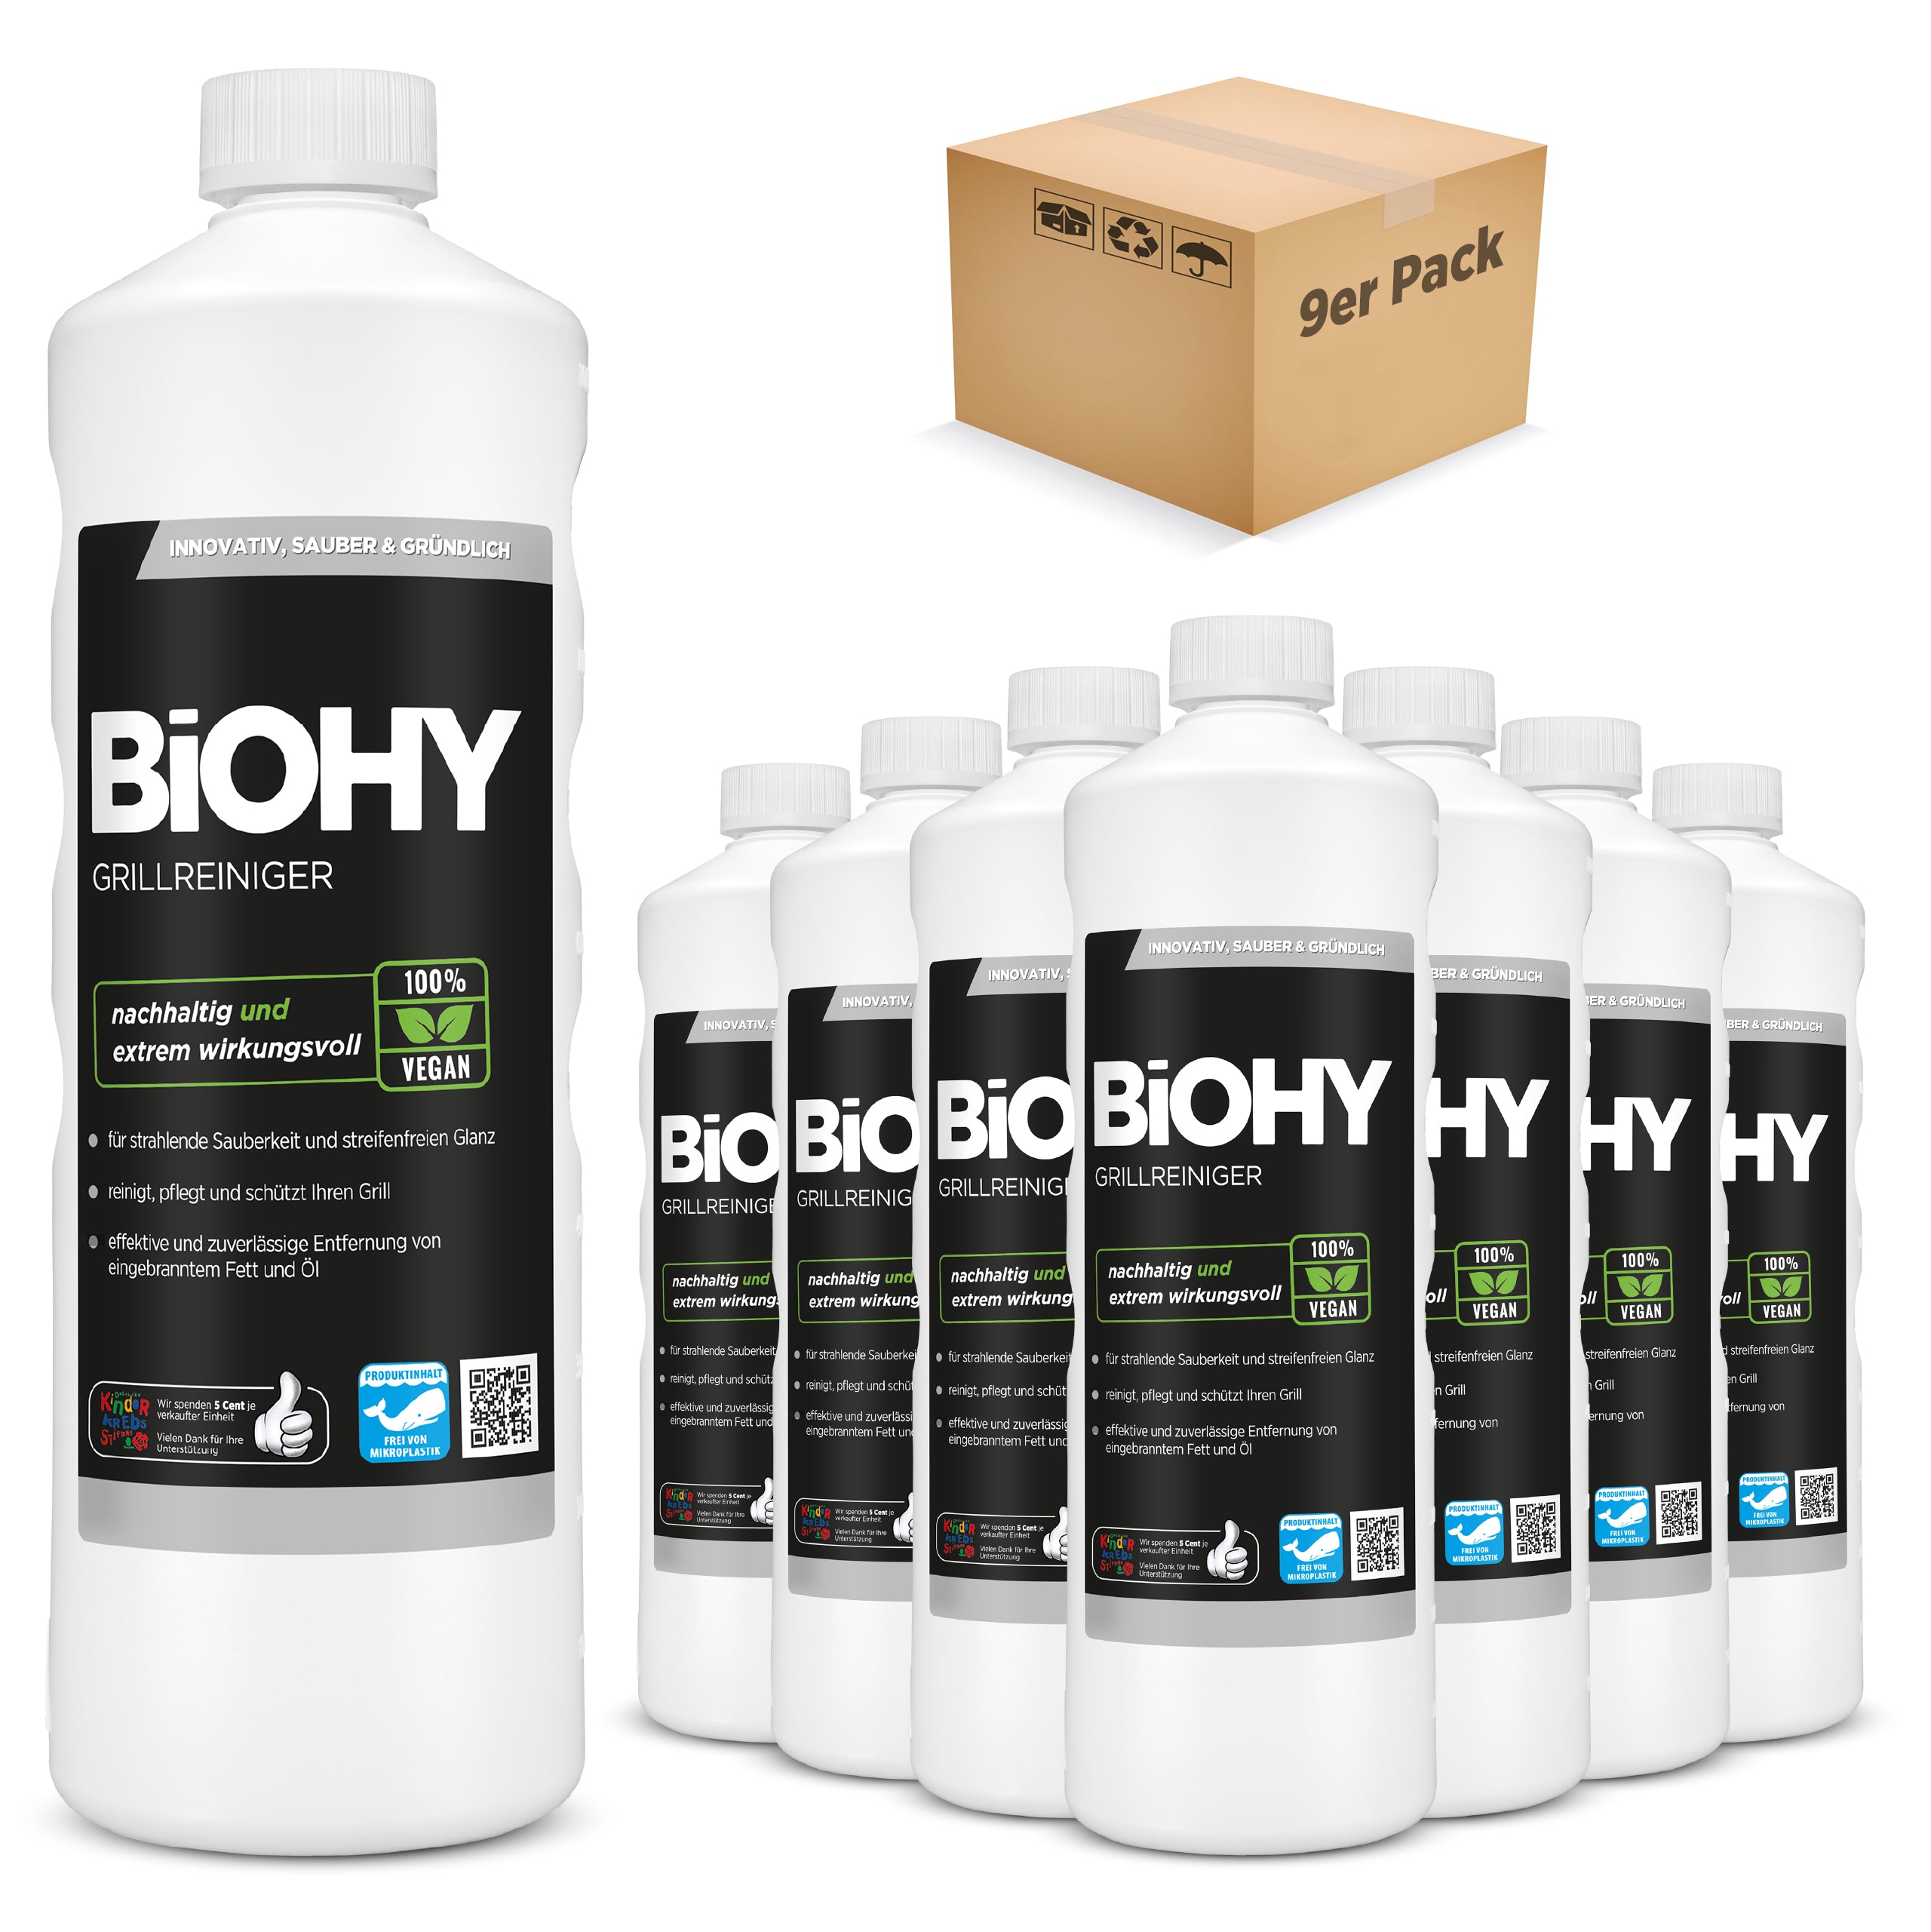 BiOHY grill cleaner, gas grill cleaner, BBQ cleaner, grill grate cleaner